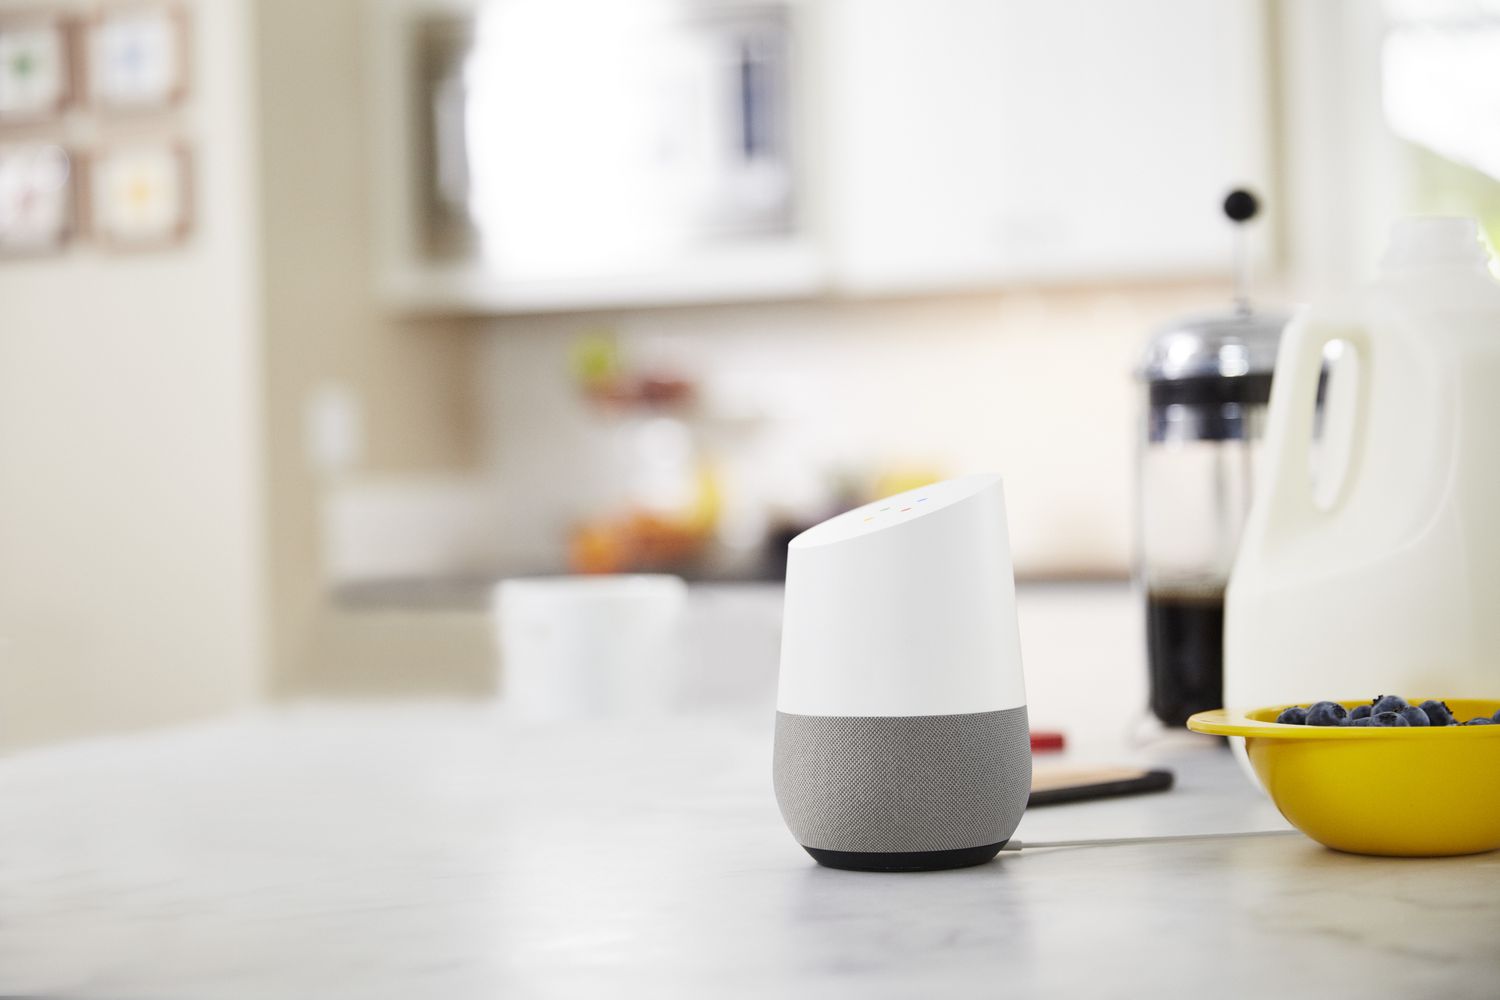 How To Create A Group On Google Home